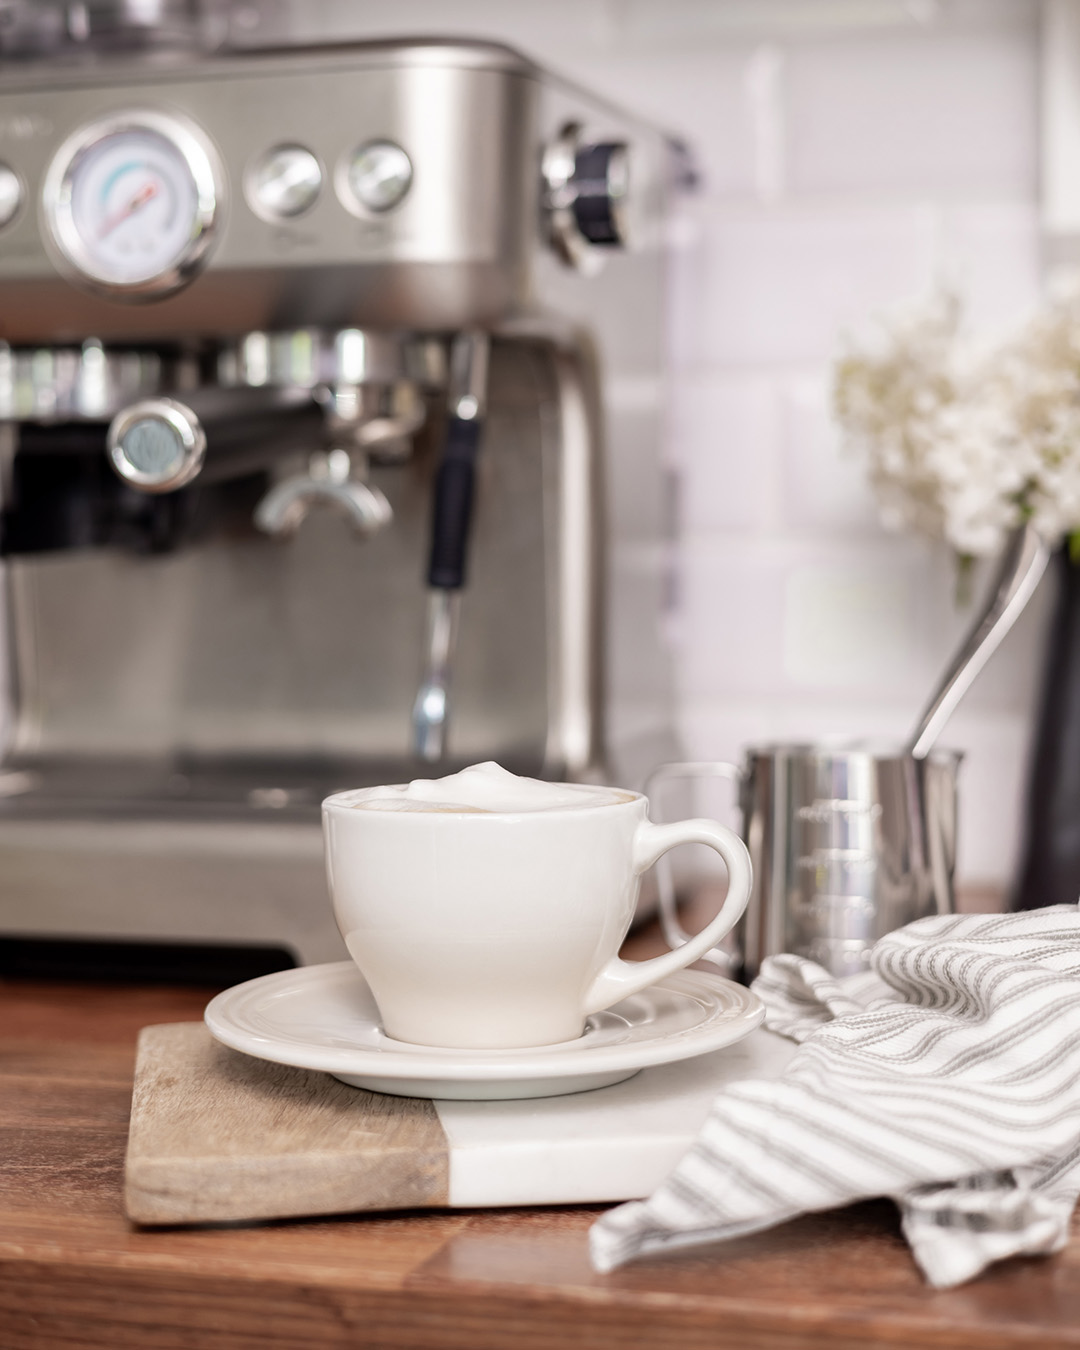 A home espresso machine with a perfectly-made cappuccino.